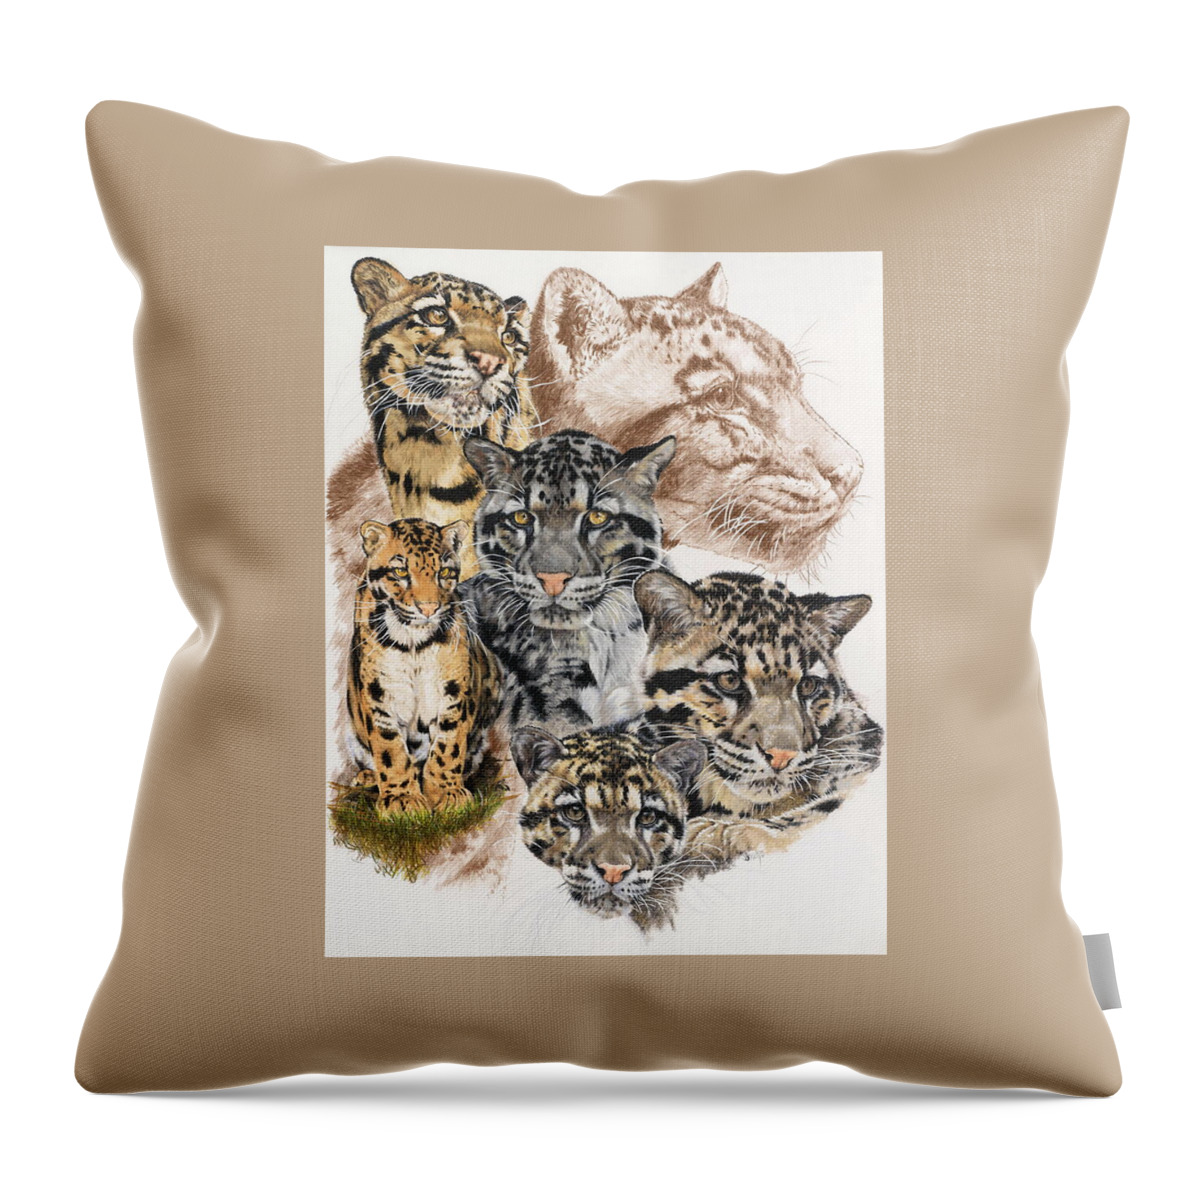 Clouded Leopard Throw Pillow featuring the mixed media Cloudburst by Barbara Keith